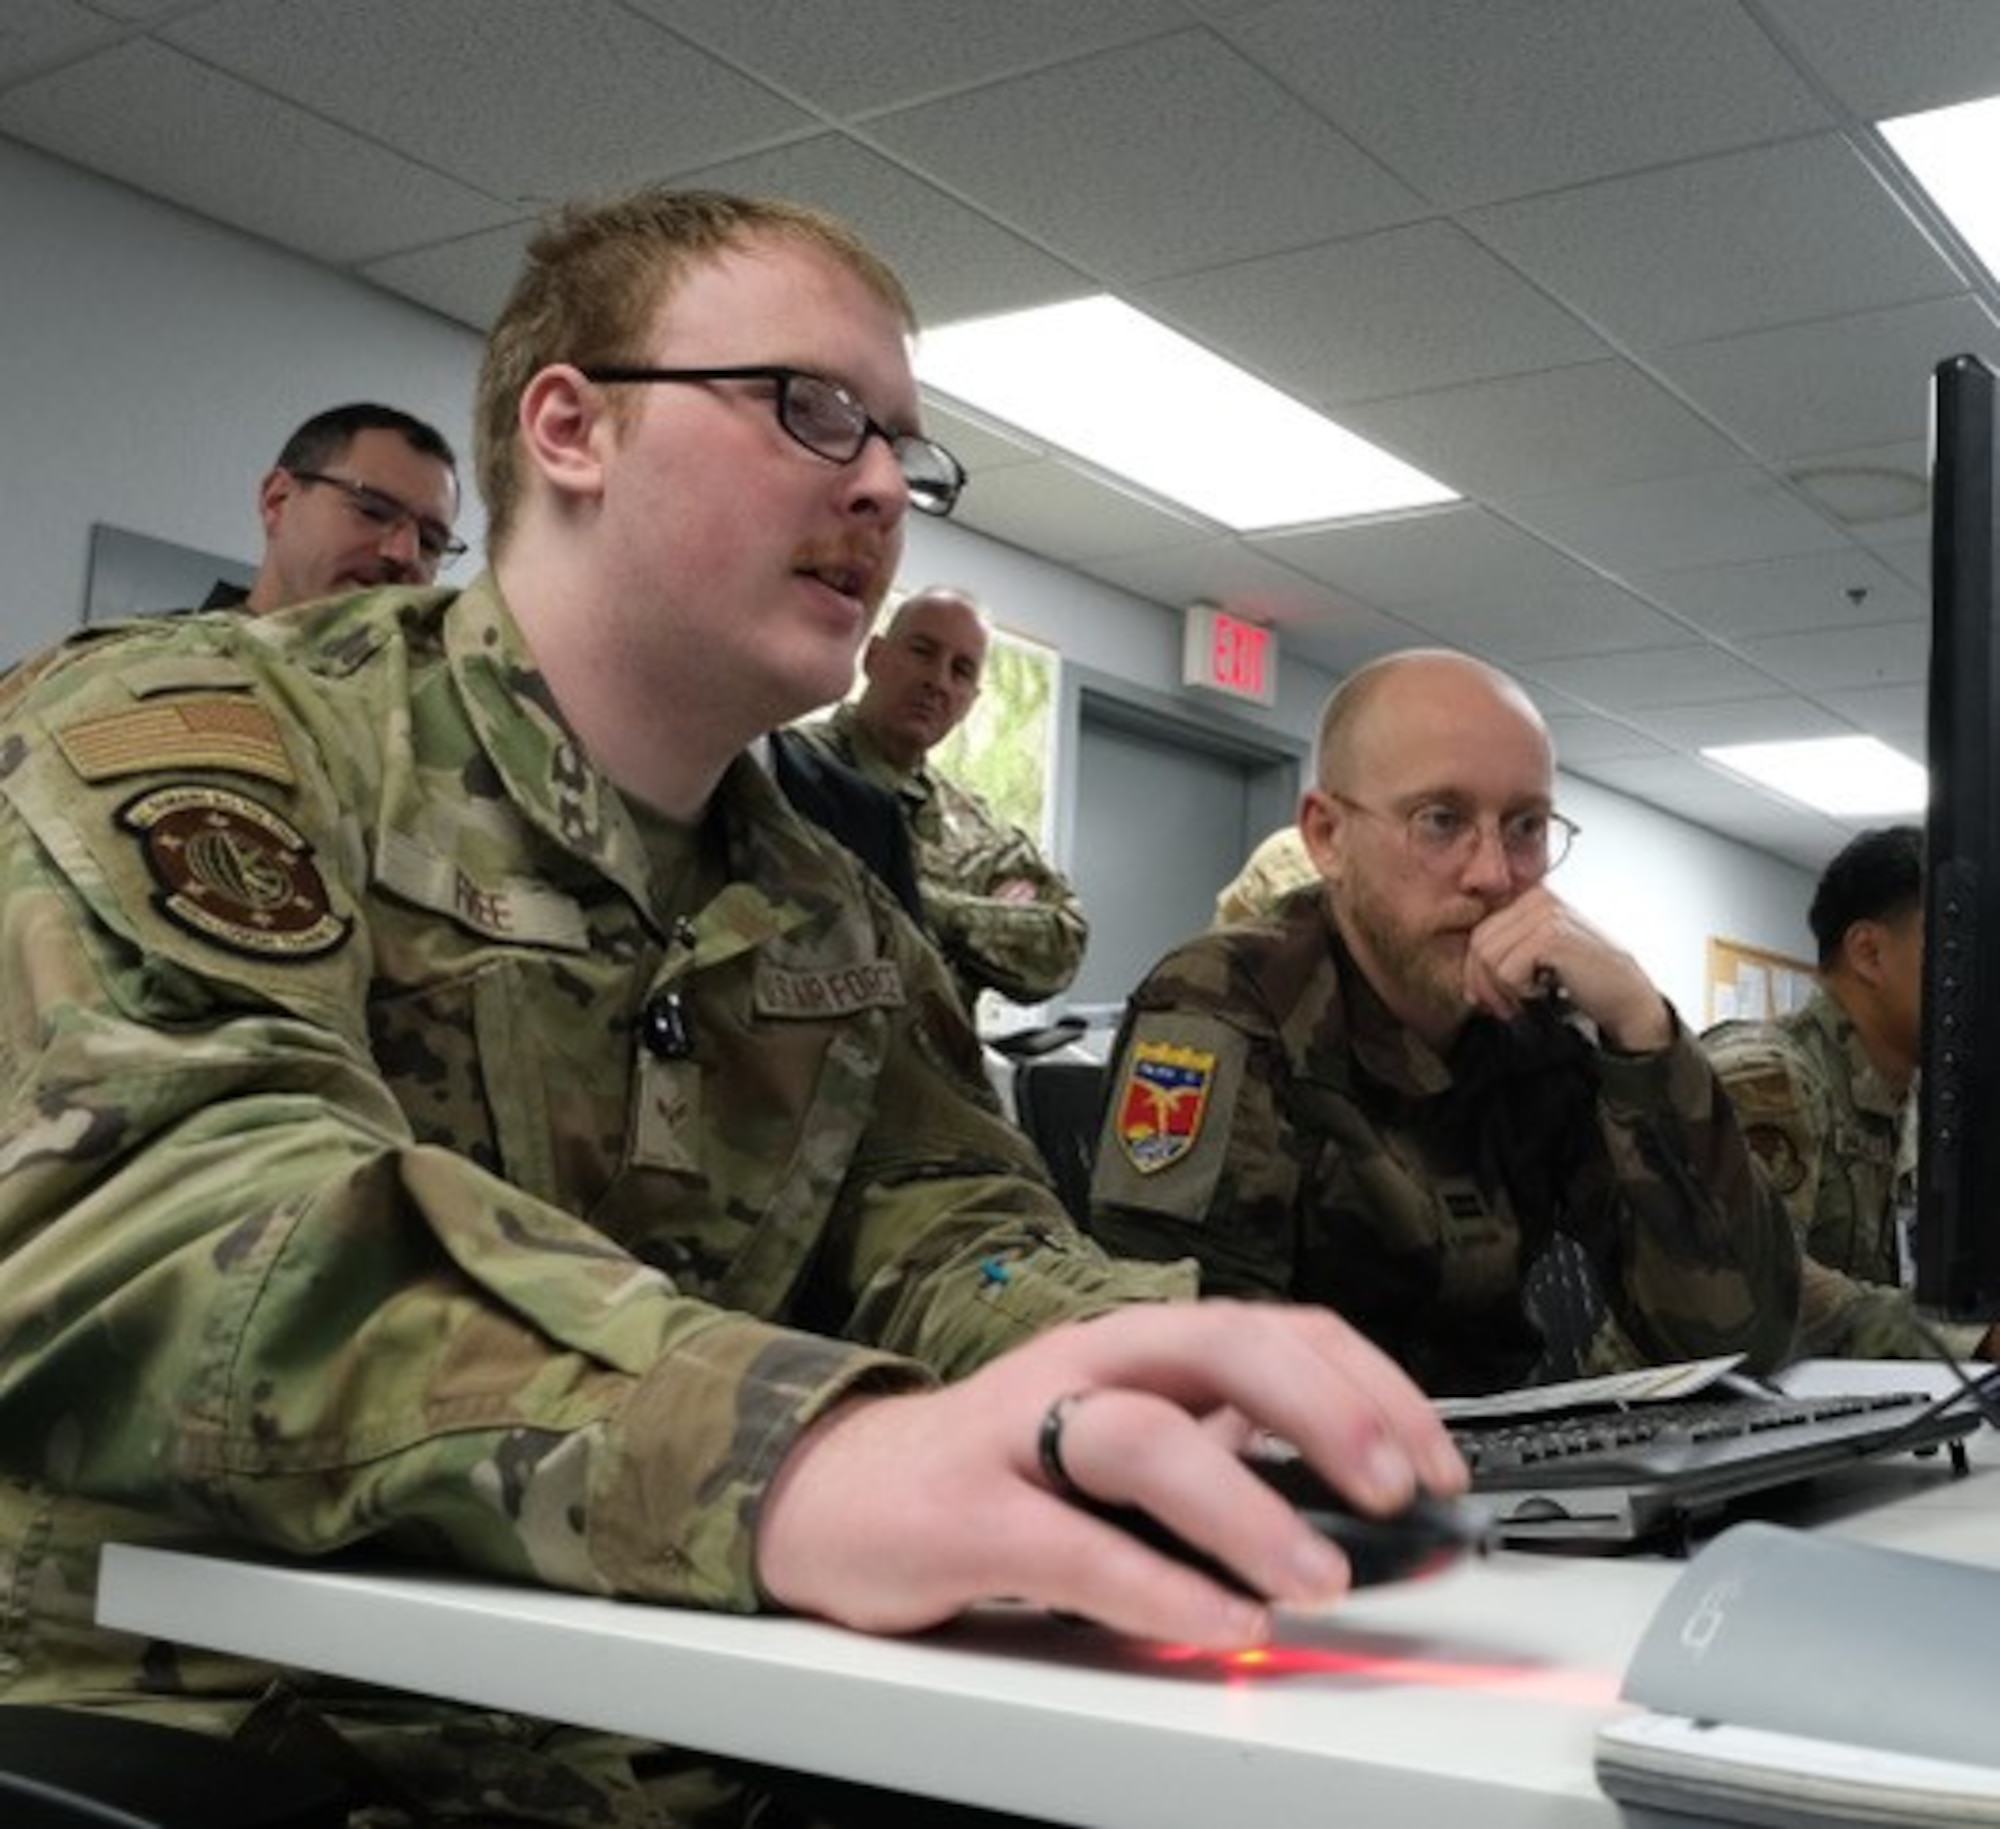 US and French military members work on computers